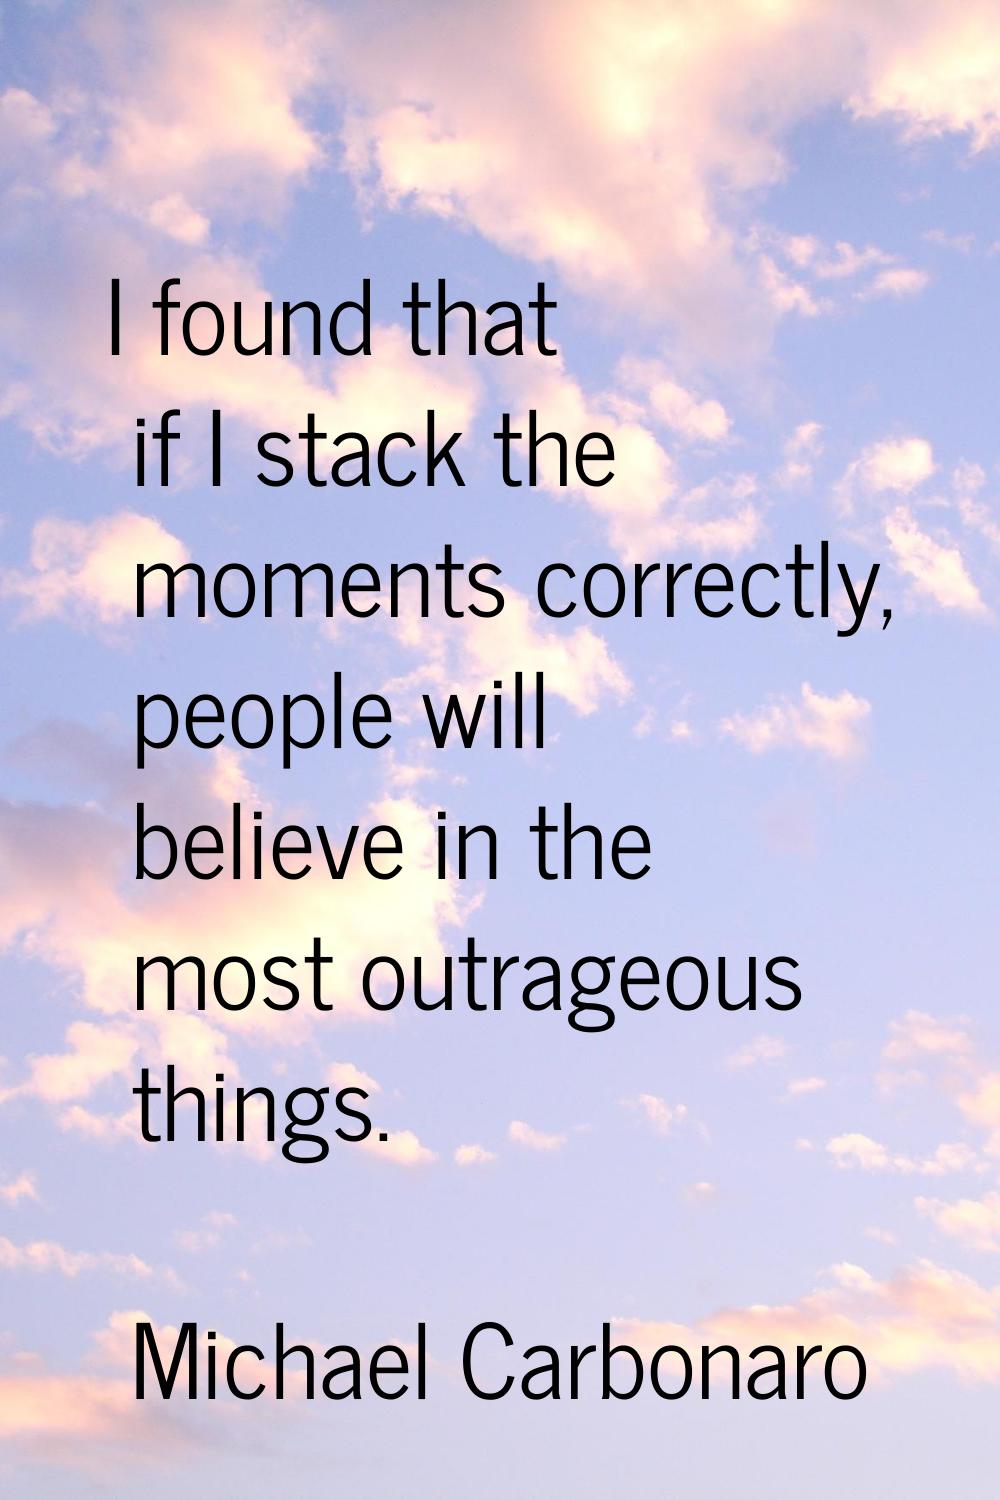 I found that if I stack the moments correctly, people will believe in the most outrageous things.